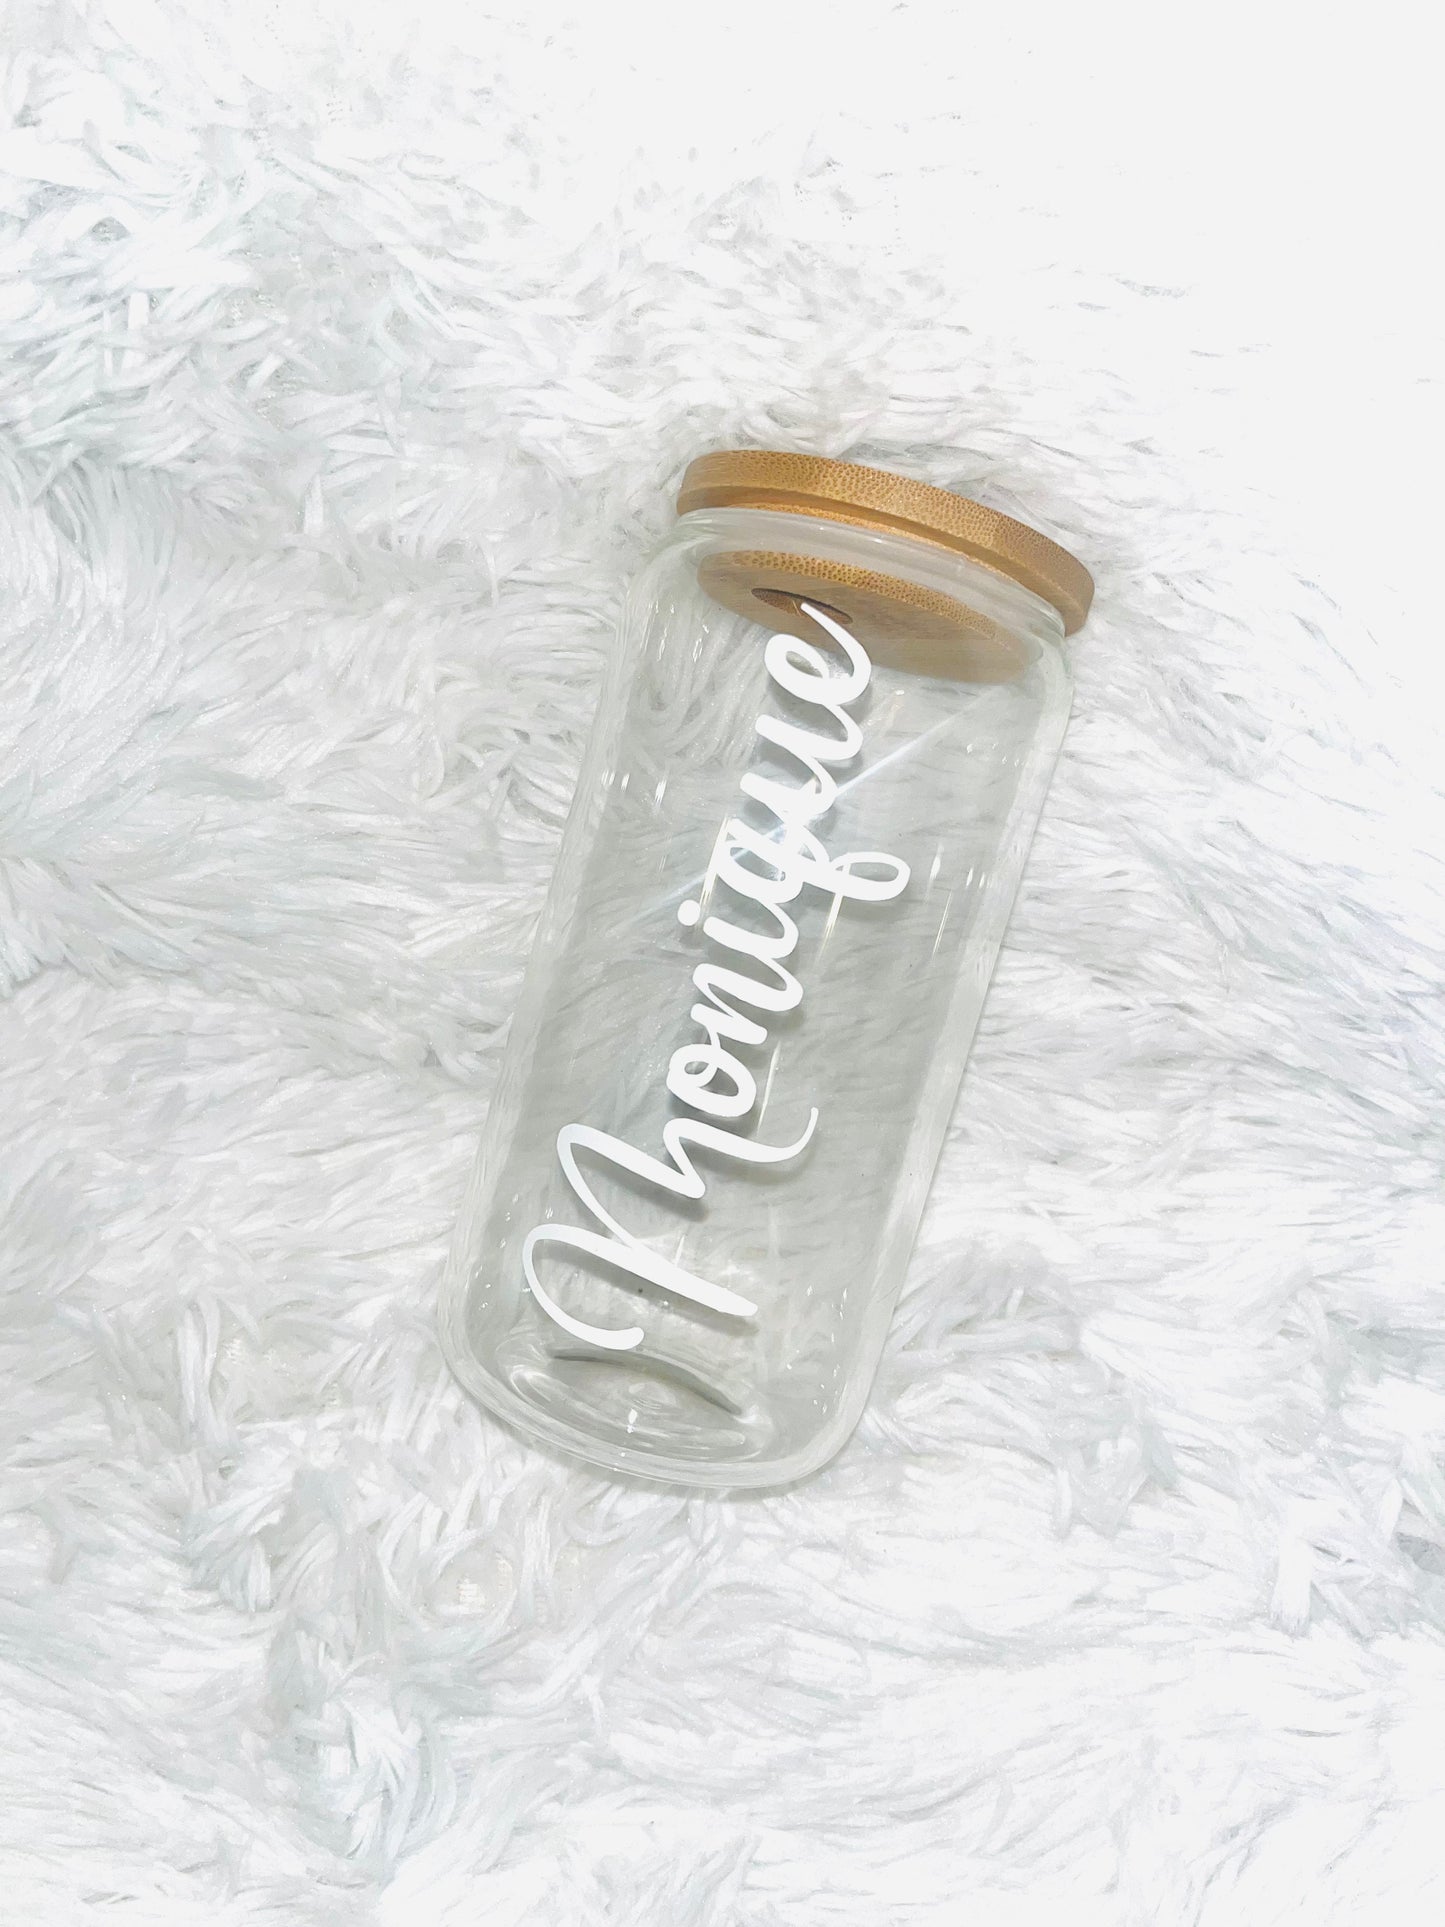 Personalized Glass Can Tumbler Beer Mug Glass Personalize It By Belle 